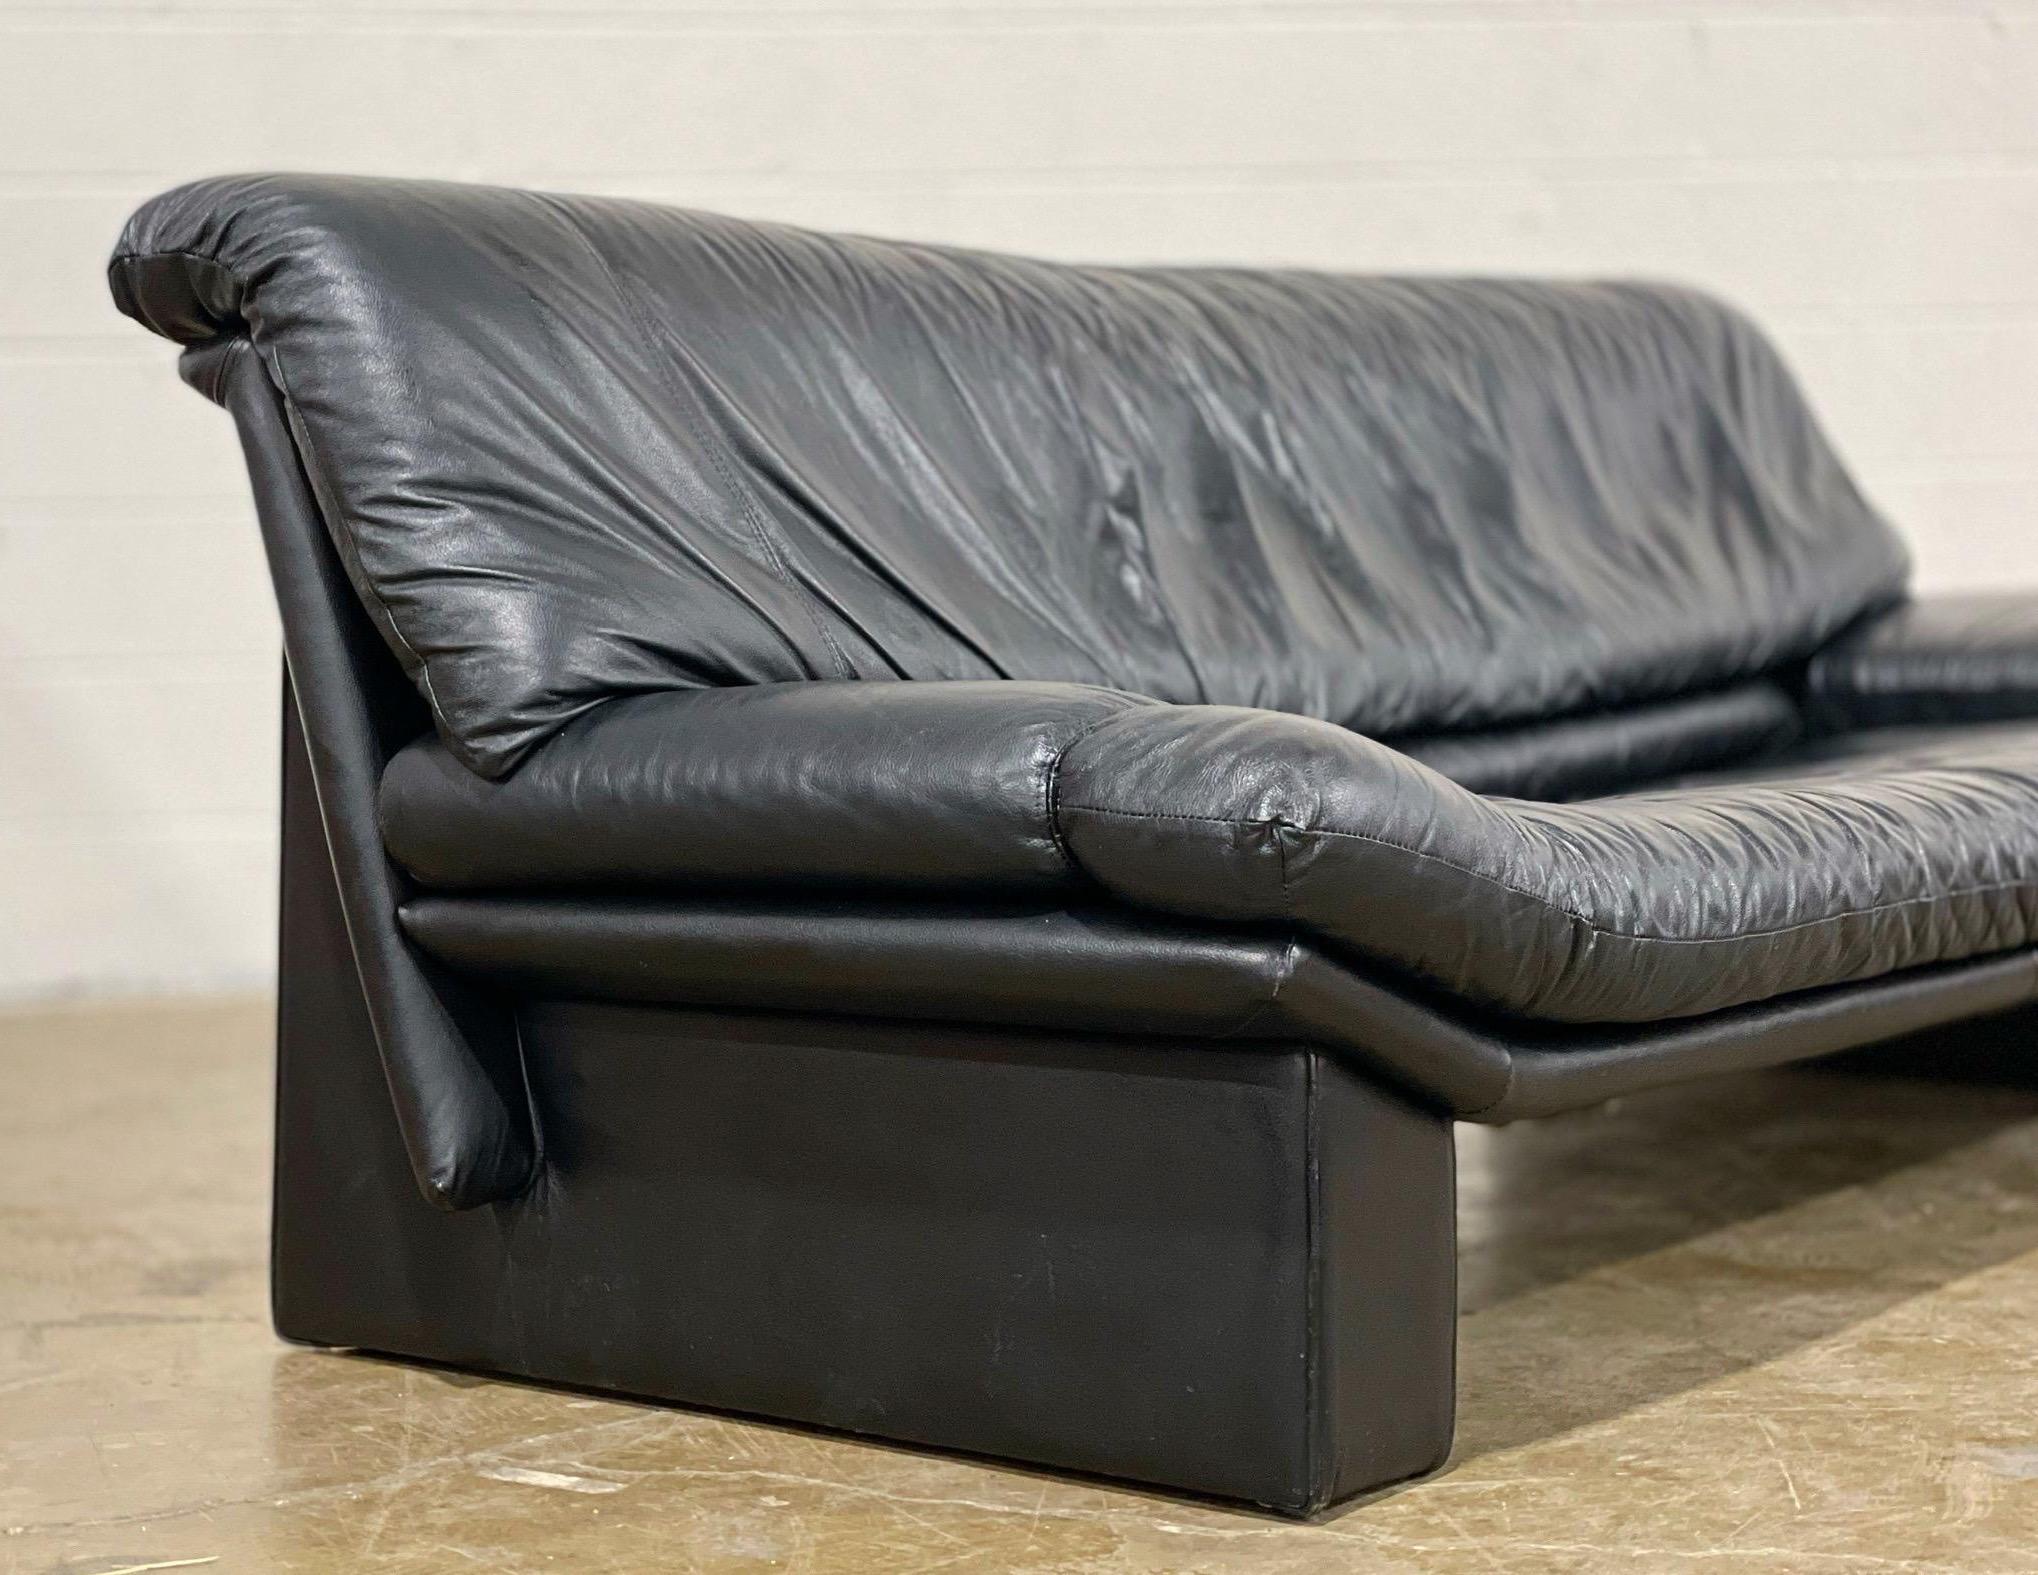 Stellar post modern sofa by Nicoletti Salotti, Italy circa 1980s. Finely appointed and fully dressed in high grade top grain black Italian leather. Striking and stark angular lines for a stunning silhouette. Attended to by our team of in house